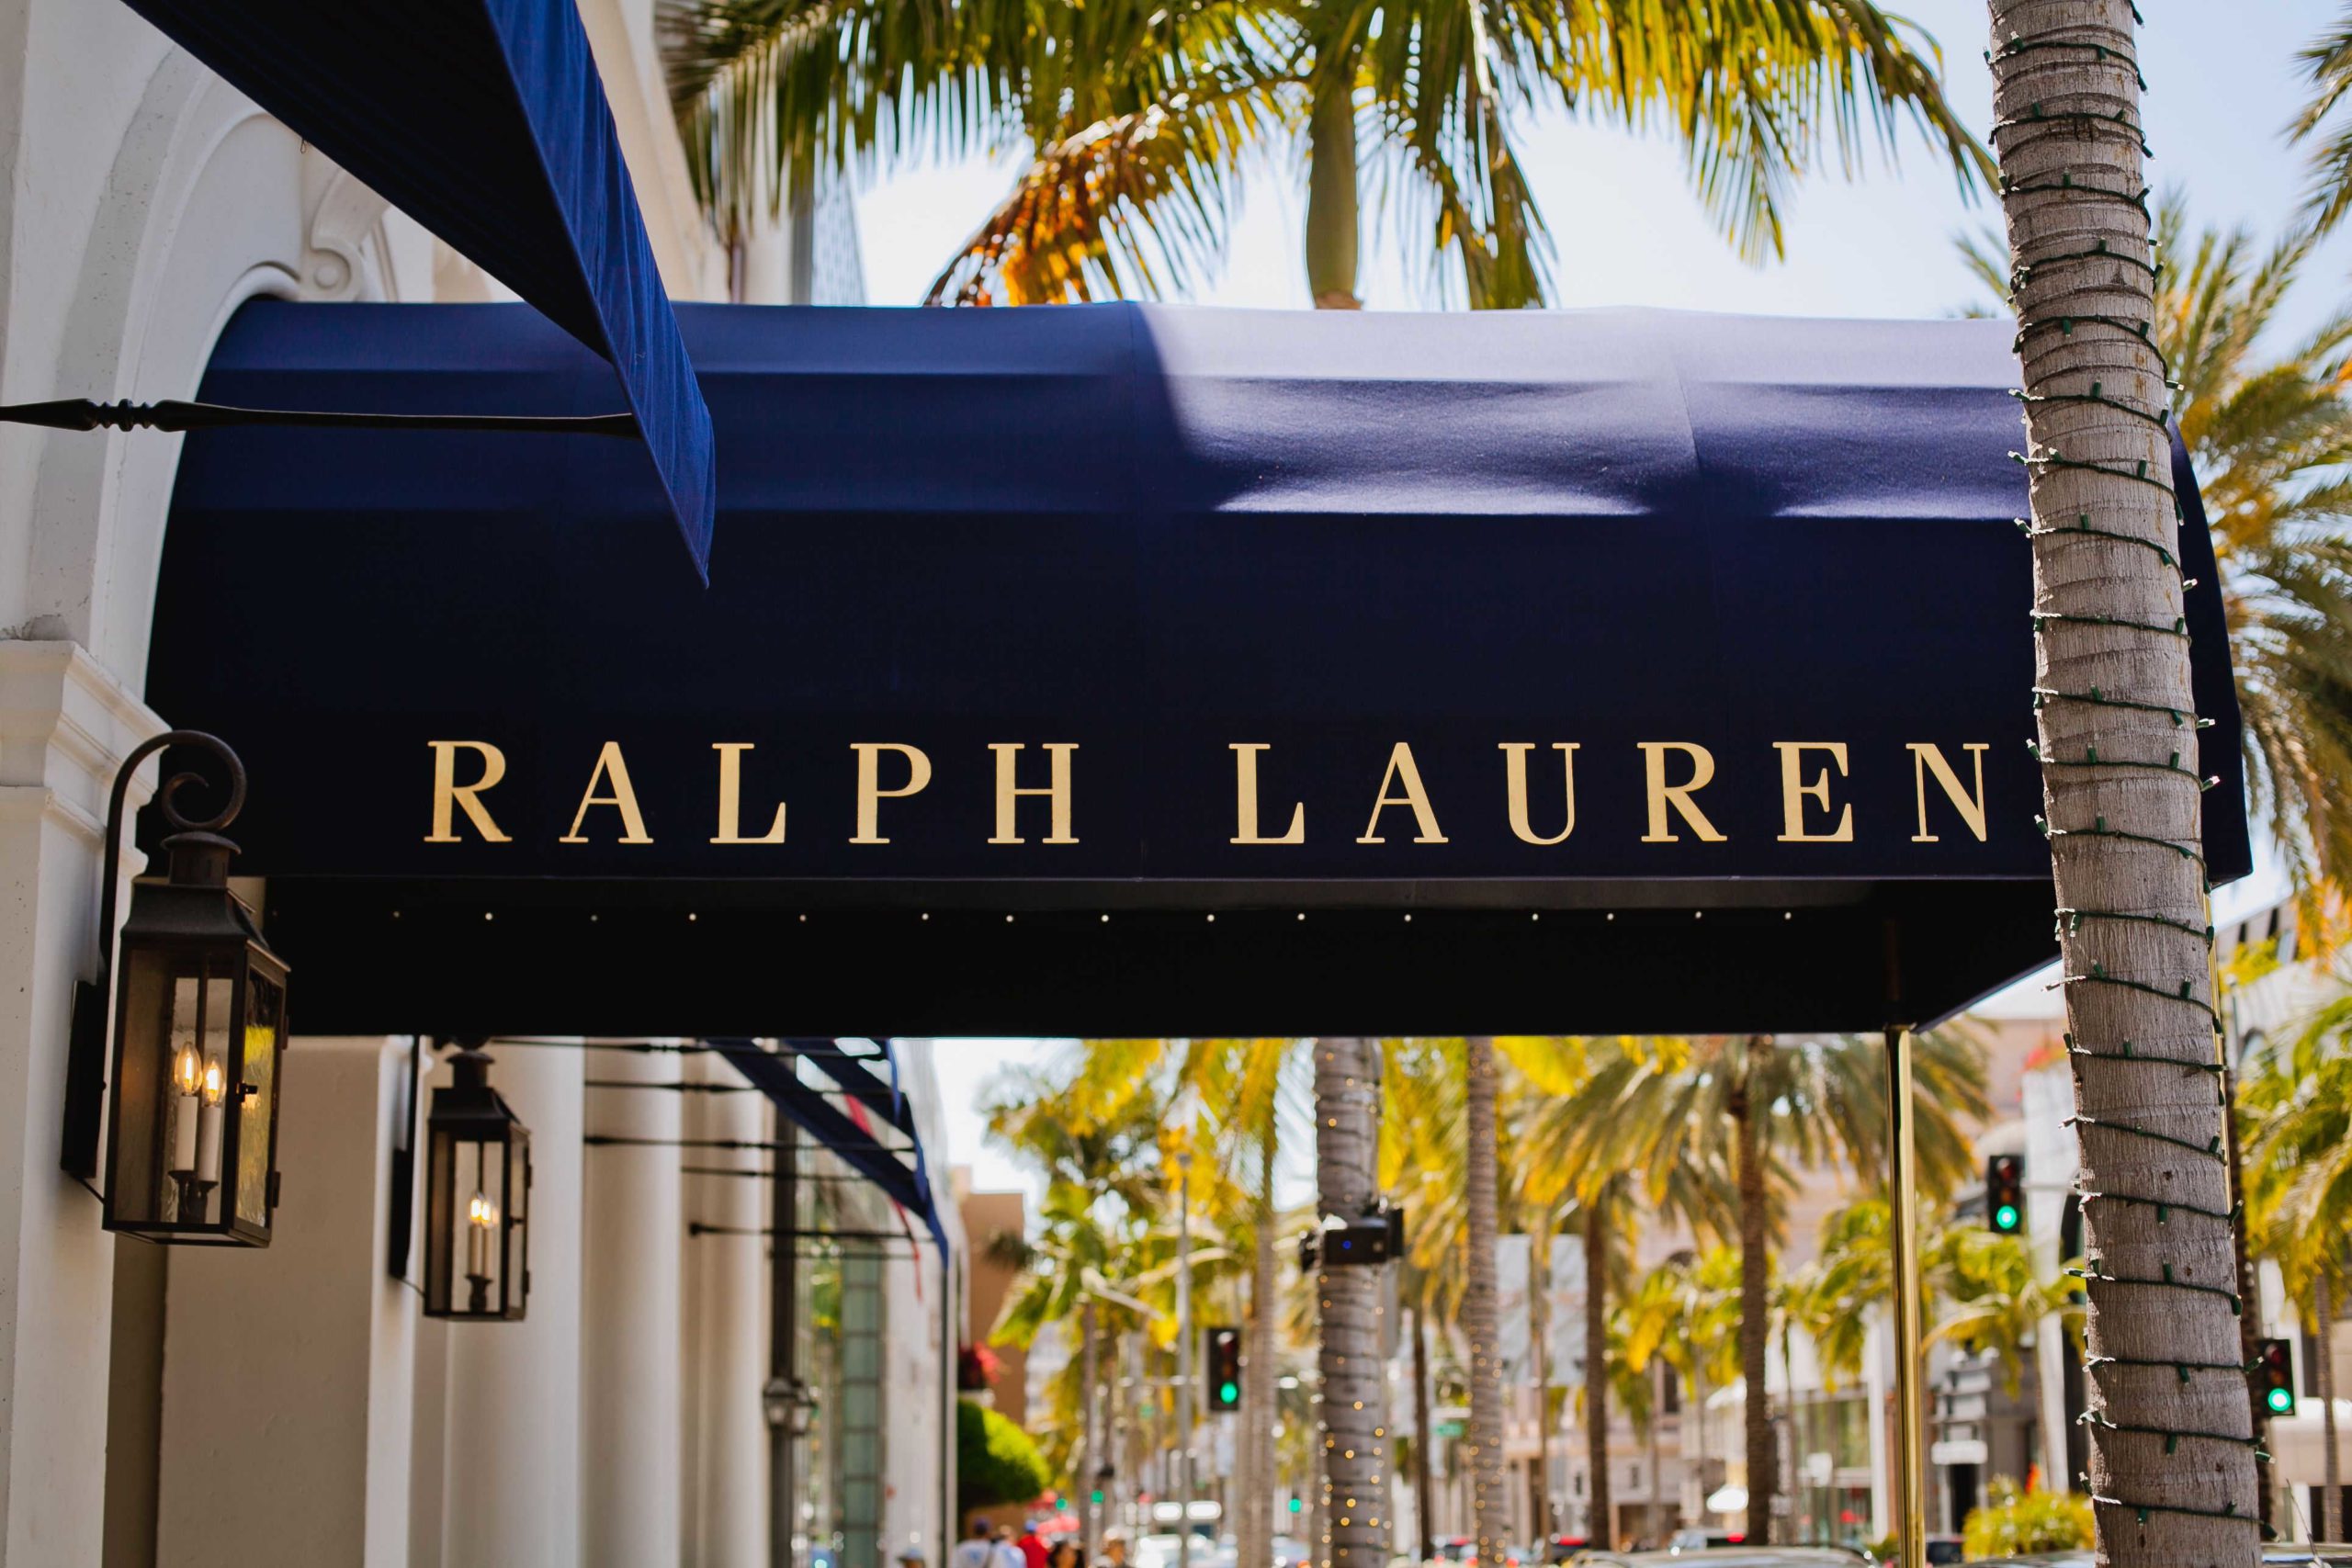 We're bringing in younger, higher-value customers, says Ralph Lauren CEO  Patrice Louvet 